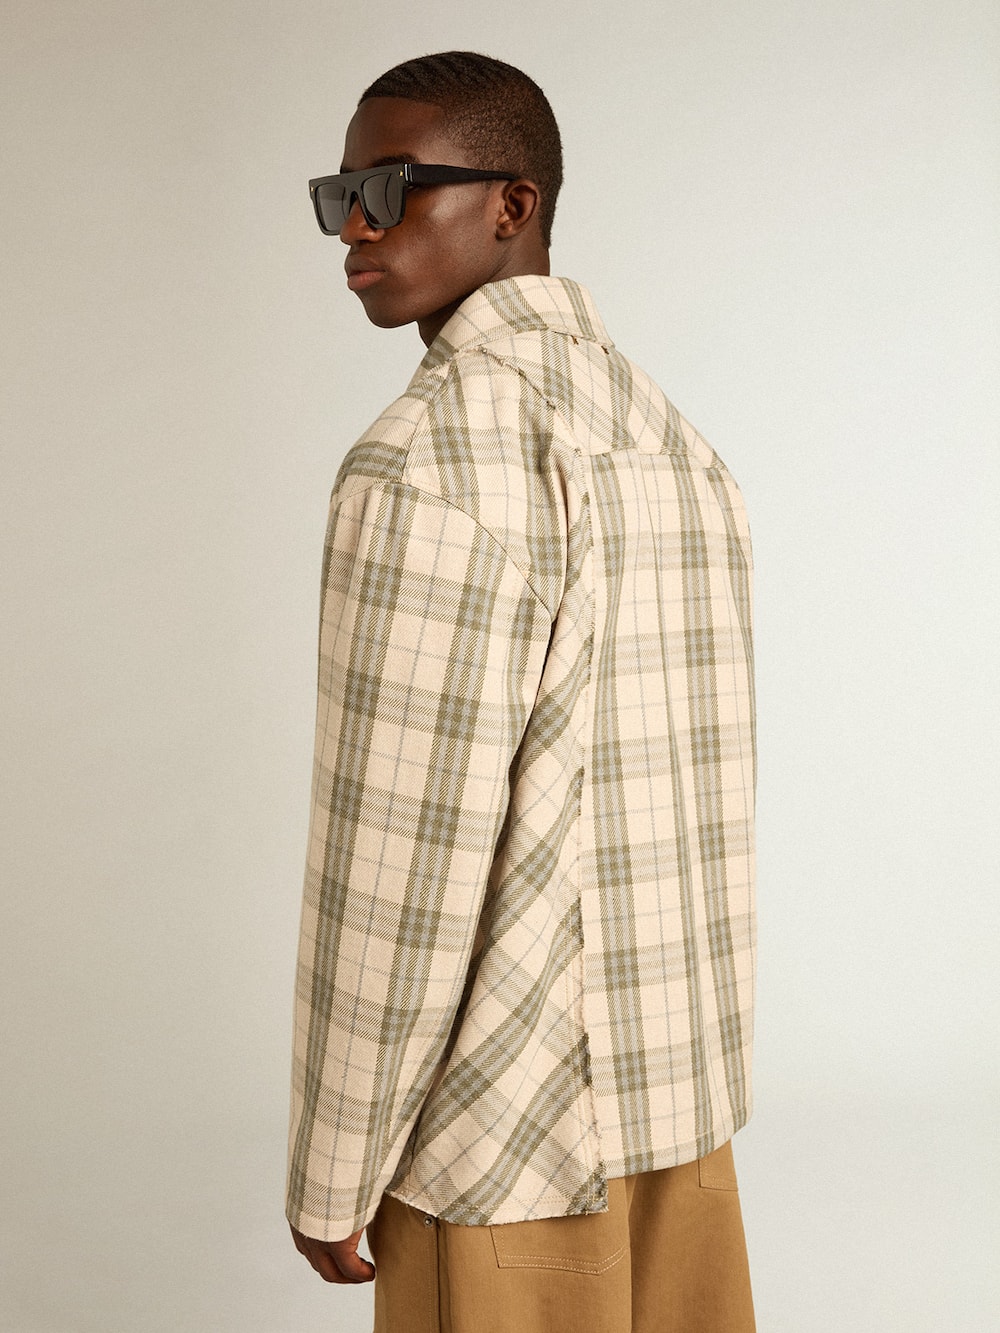 Golden Goose - Men's slim-fit shirt made of ecru and green cotton flannel in 